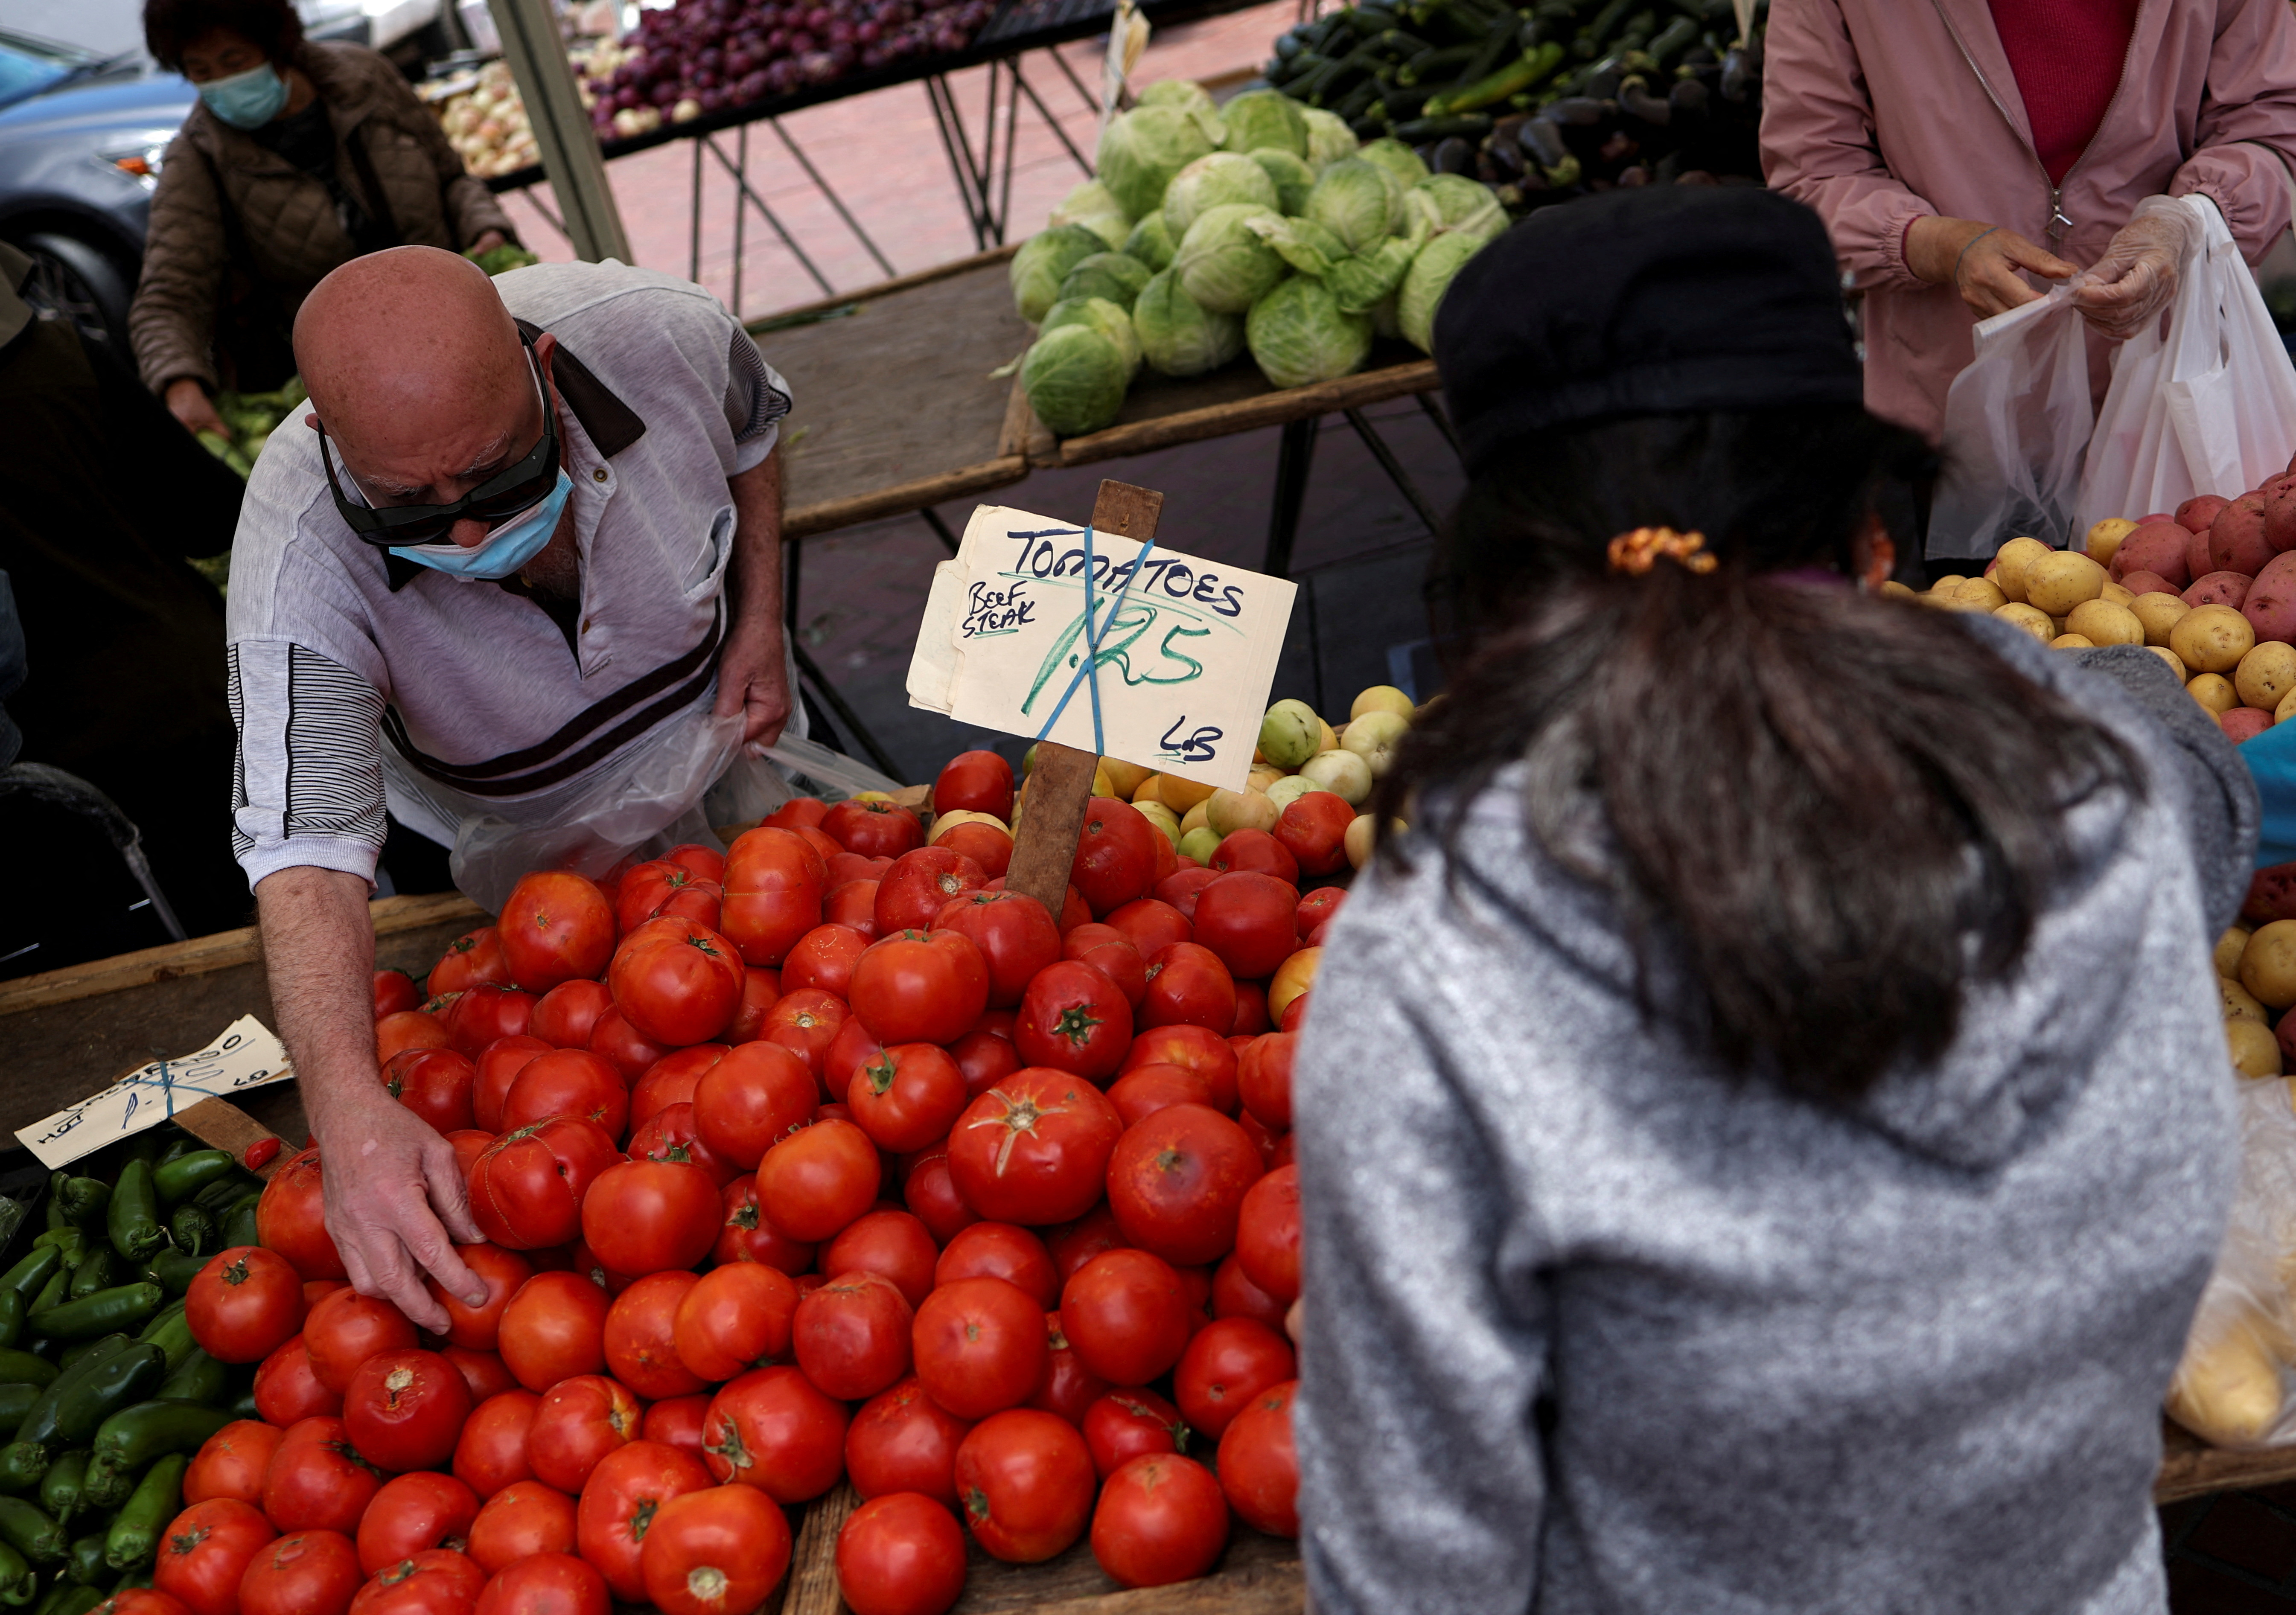 Residents buy food at a local market, in downtown San Francisco, California